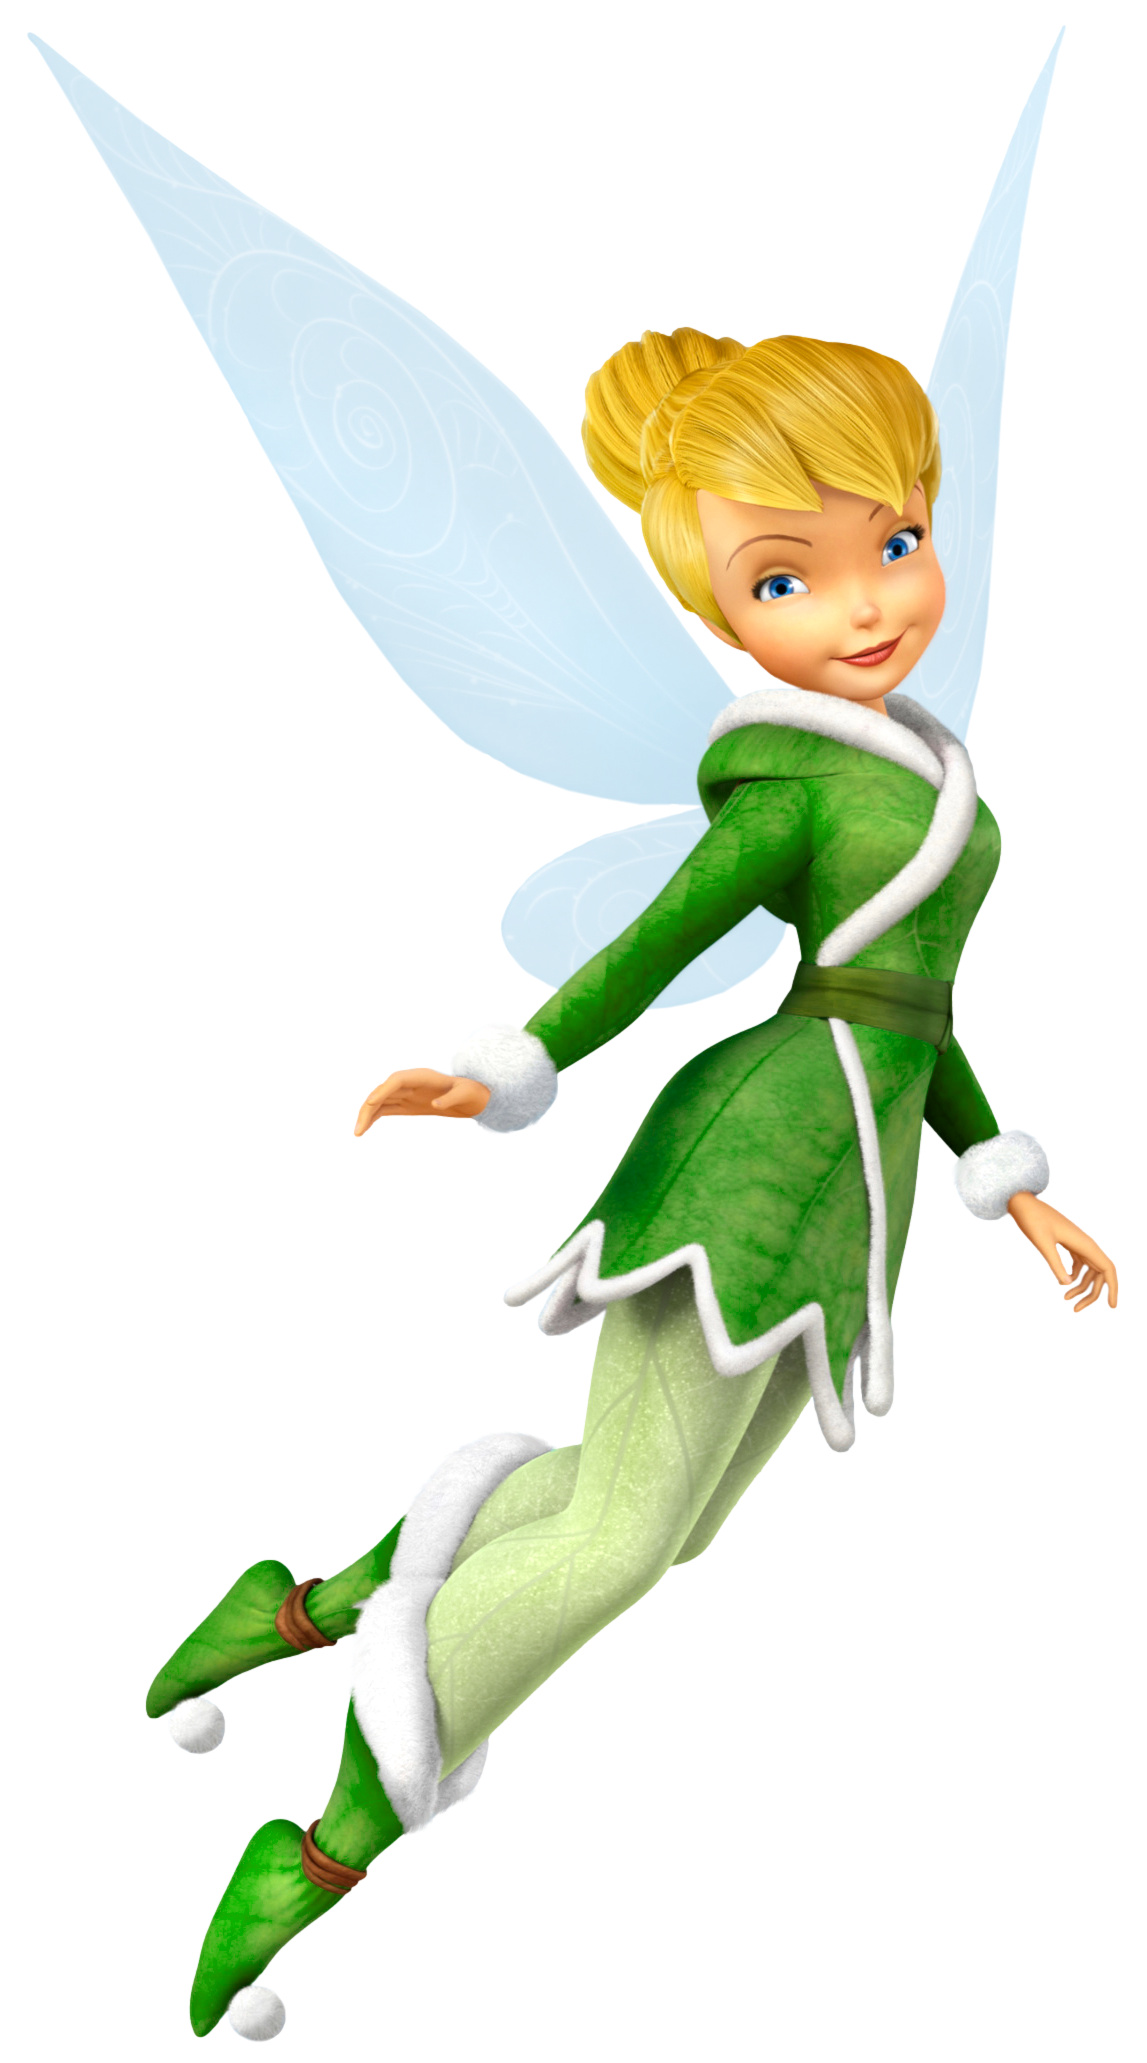 Tinker Bell fairy PNG, High-quality cartoon images, Transparent backgrounds, Disney fairies, 1150x2070 HD Handy